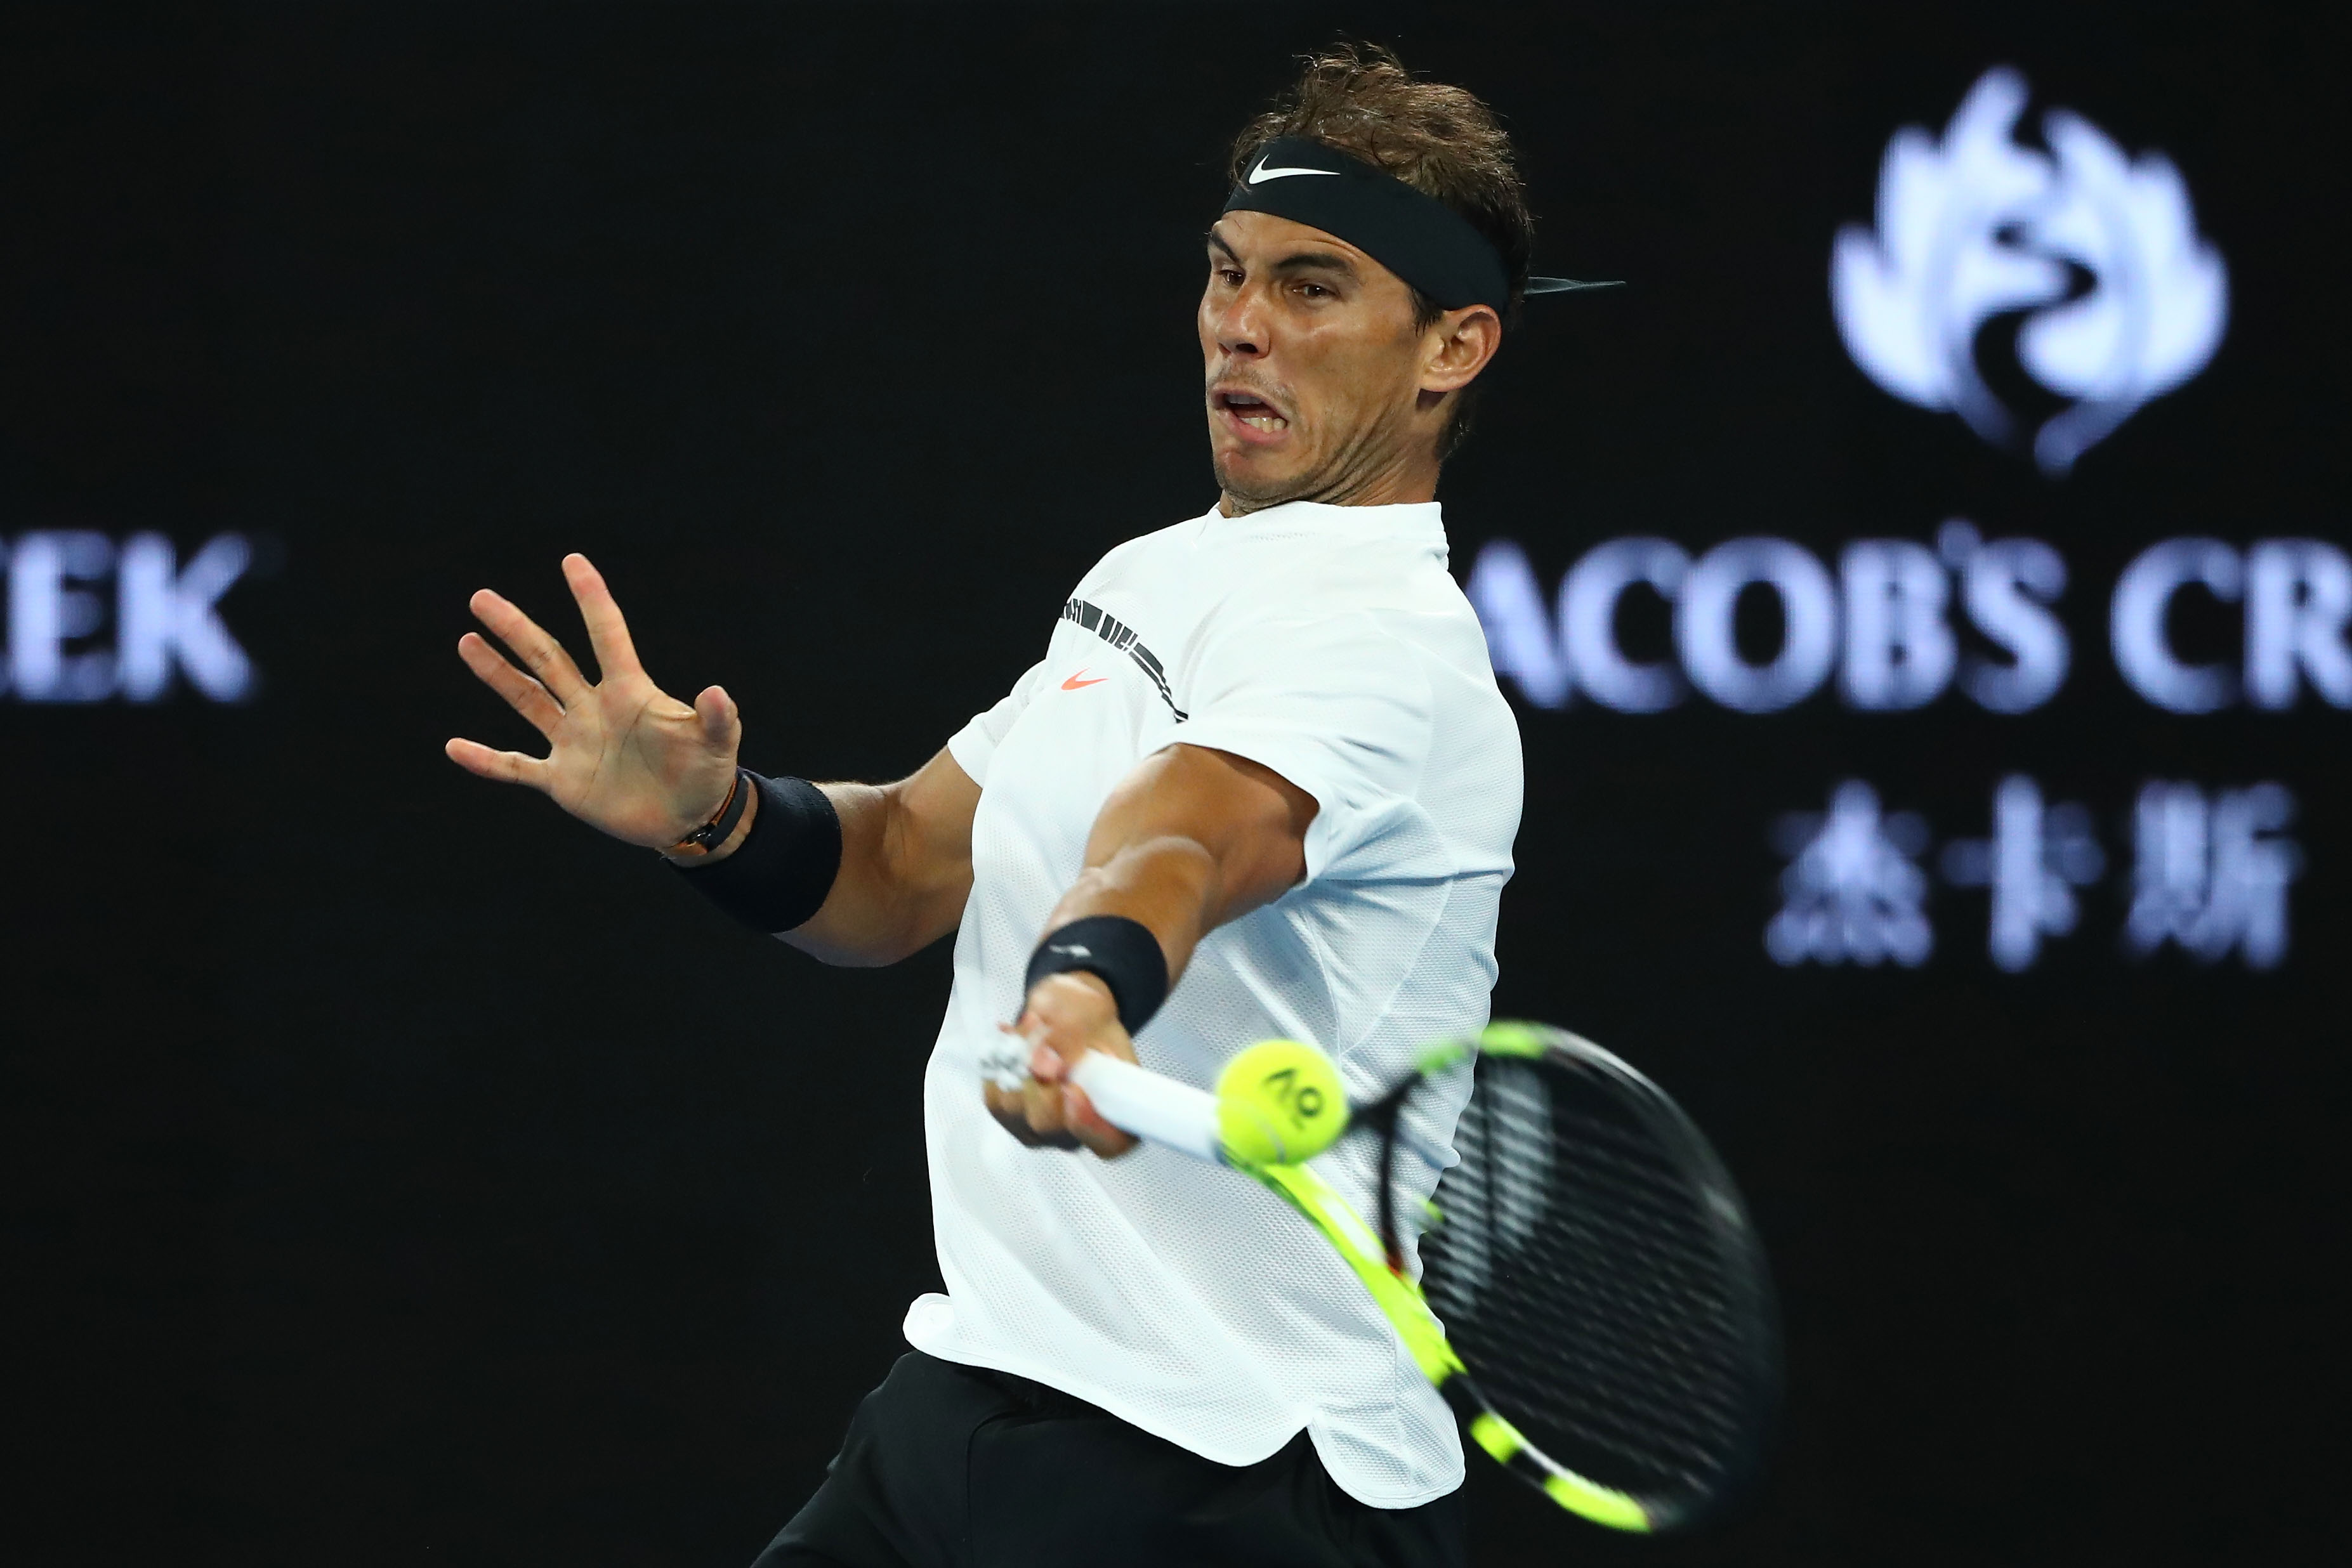 Expert asks opponents to surprise Rafael Nadal by underarm serve